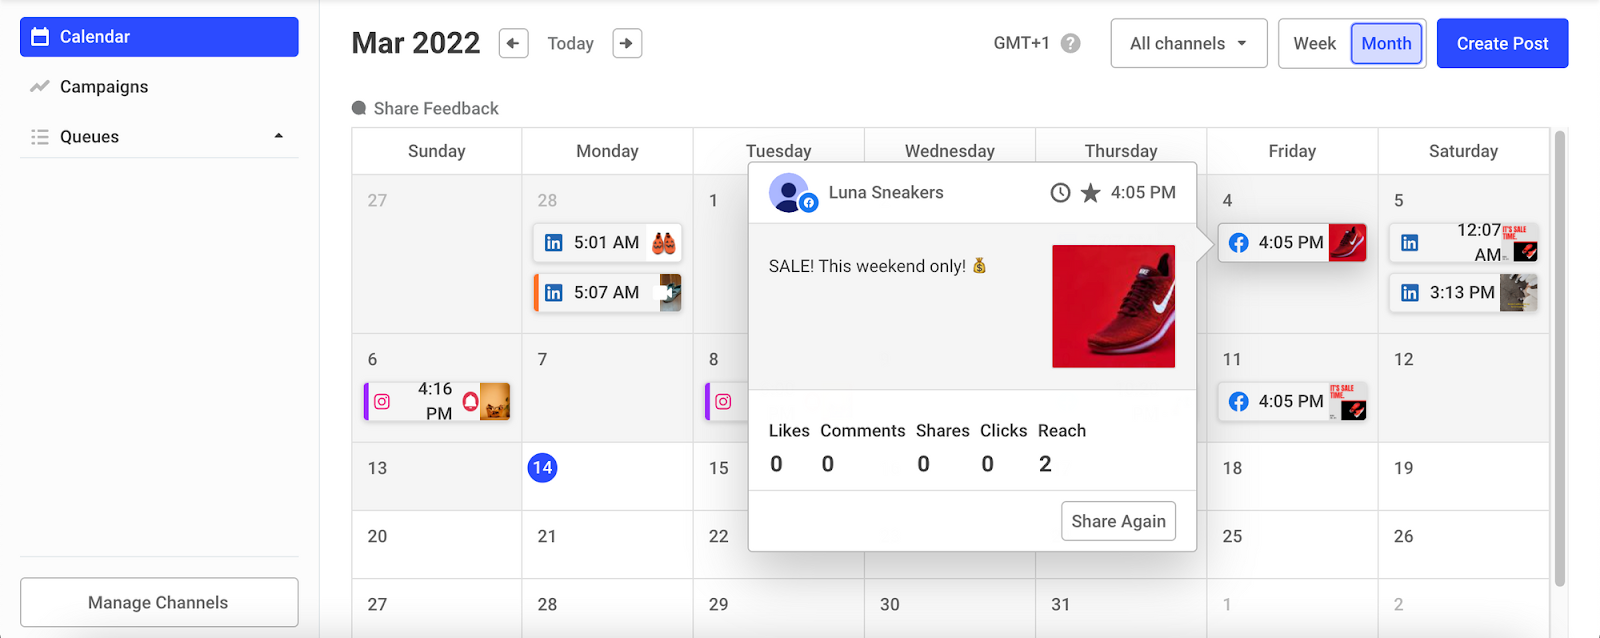 How to Create Your Own Social Media Calendar in 7 Simple Steps